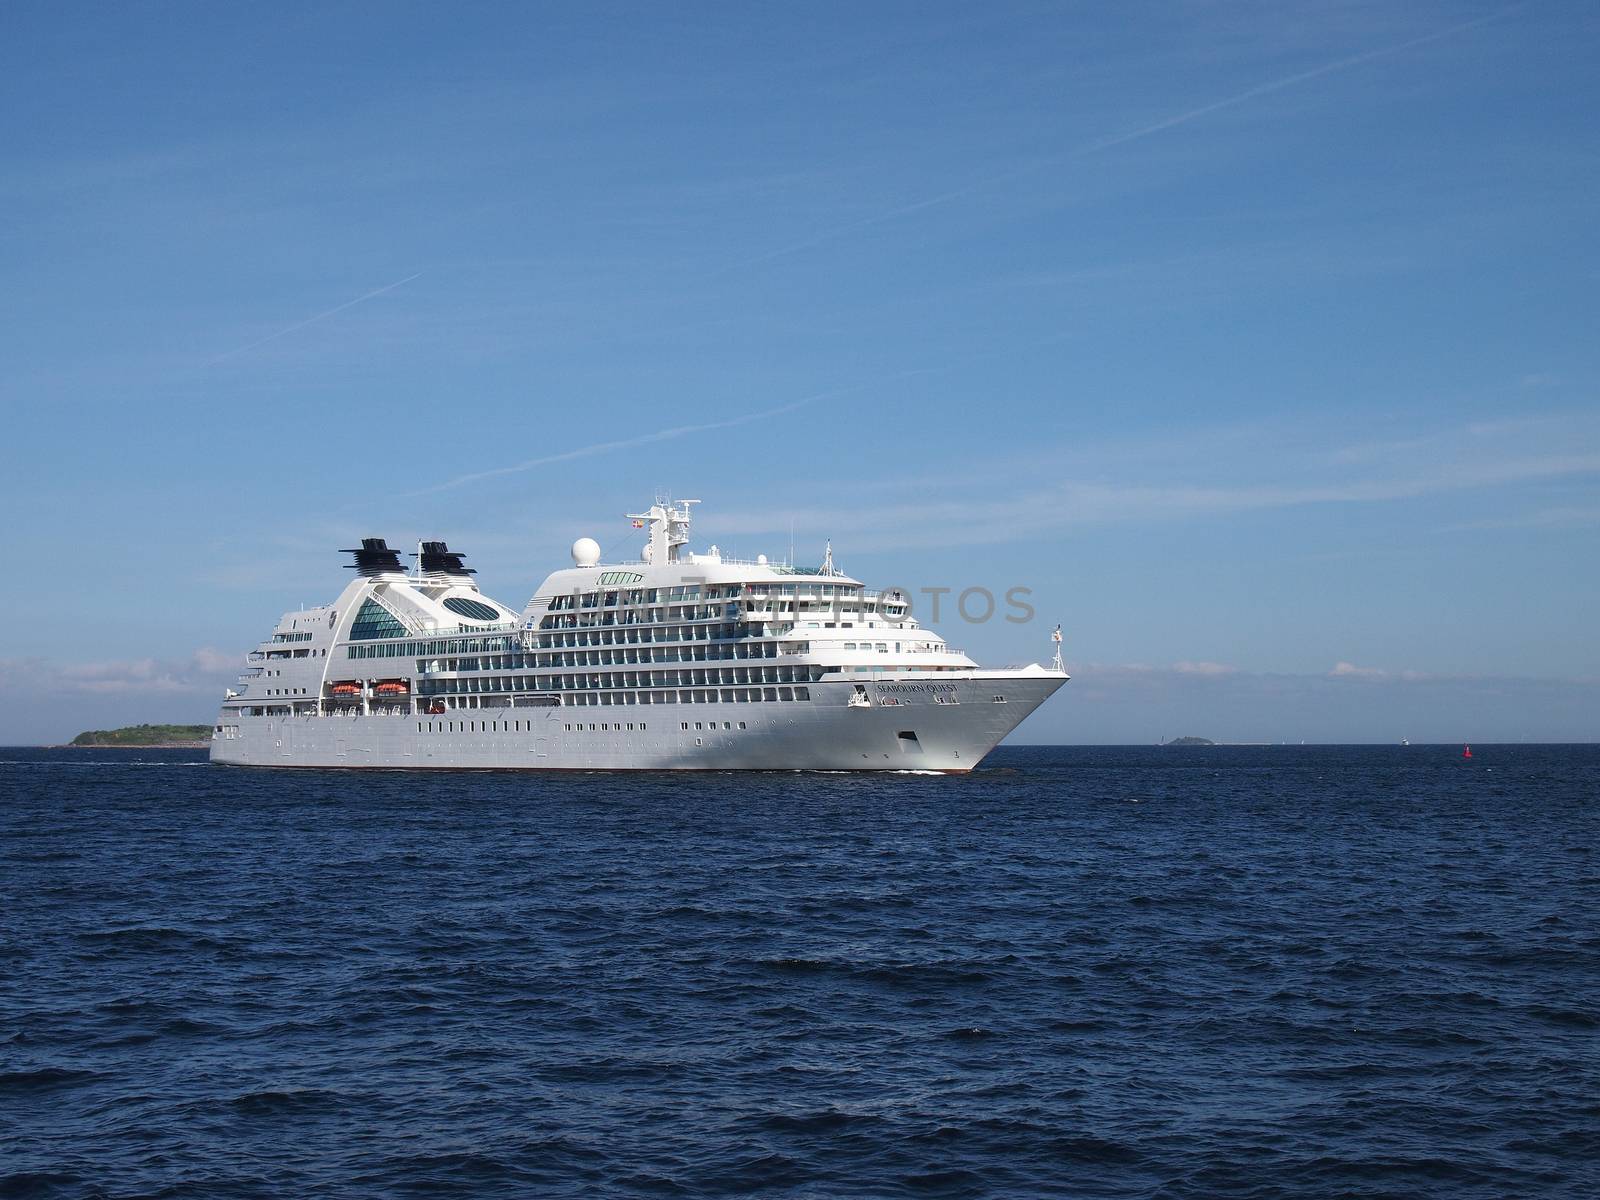 seabourn quest - cruise ship by Ric510